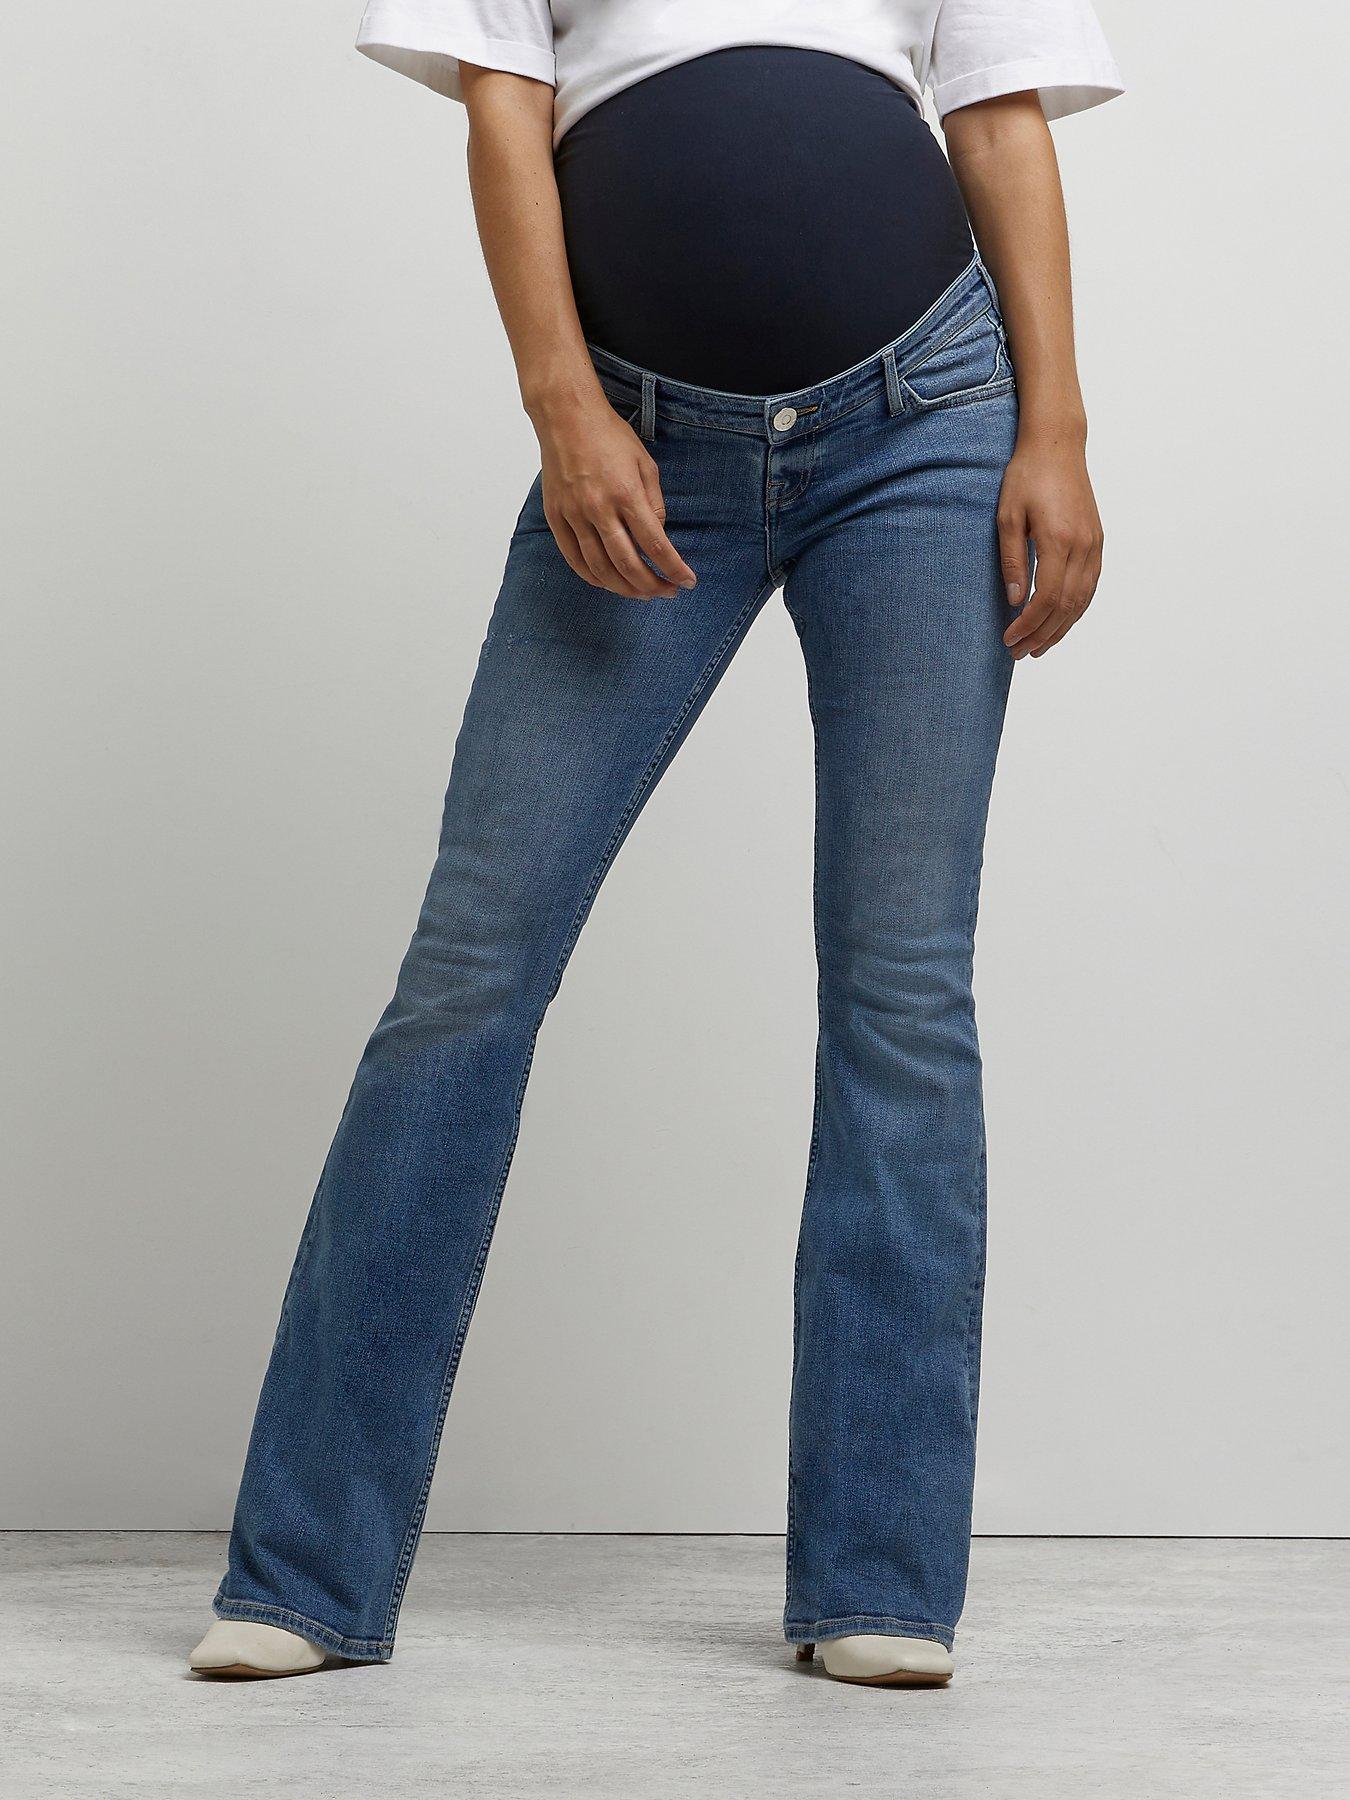 River Island Jeans - Blue very.co.uk